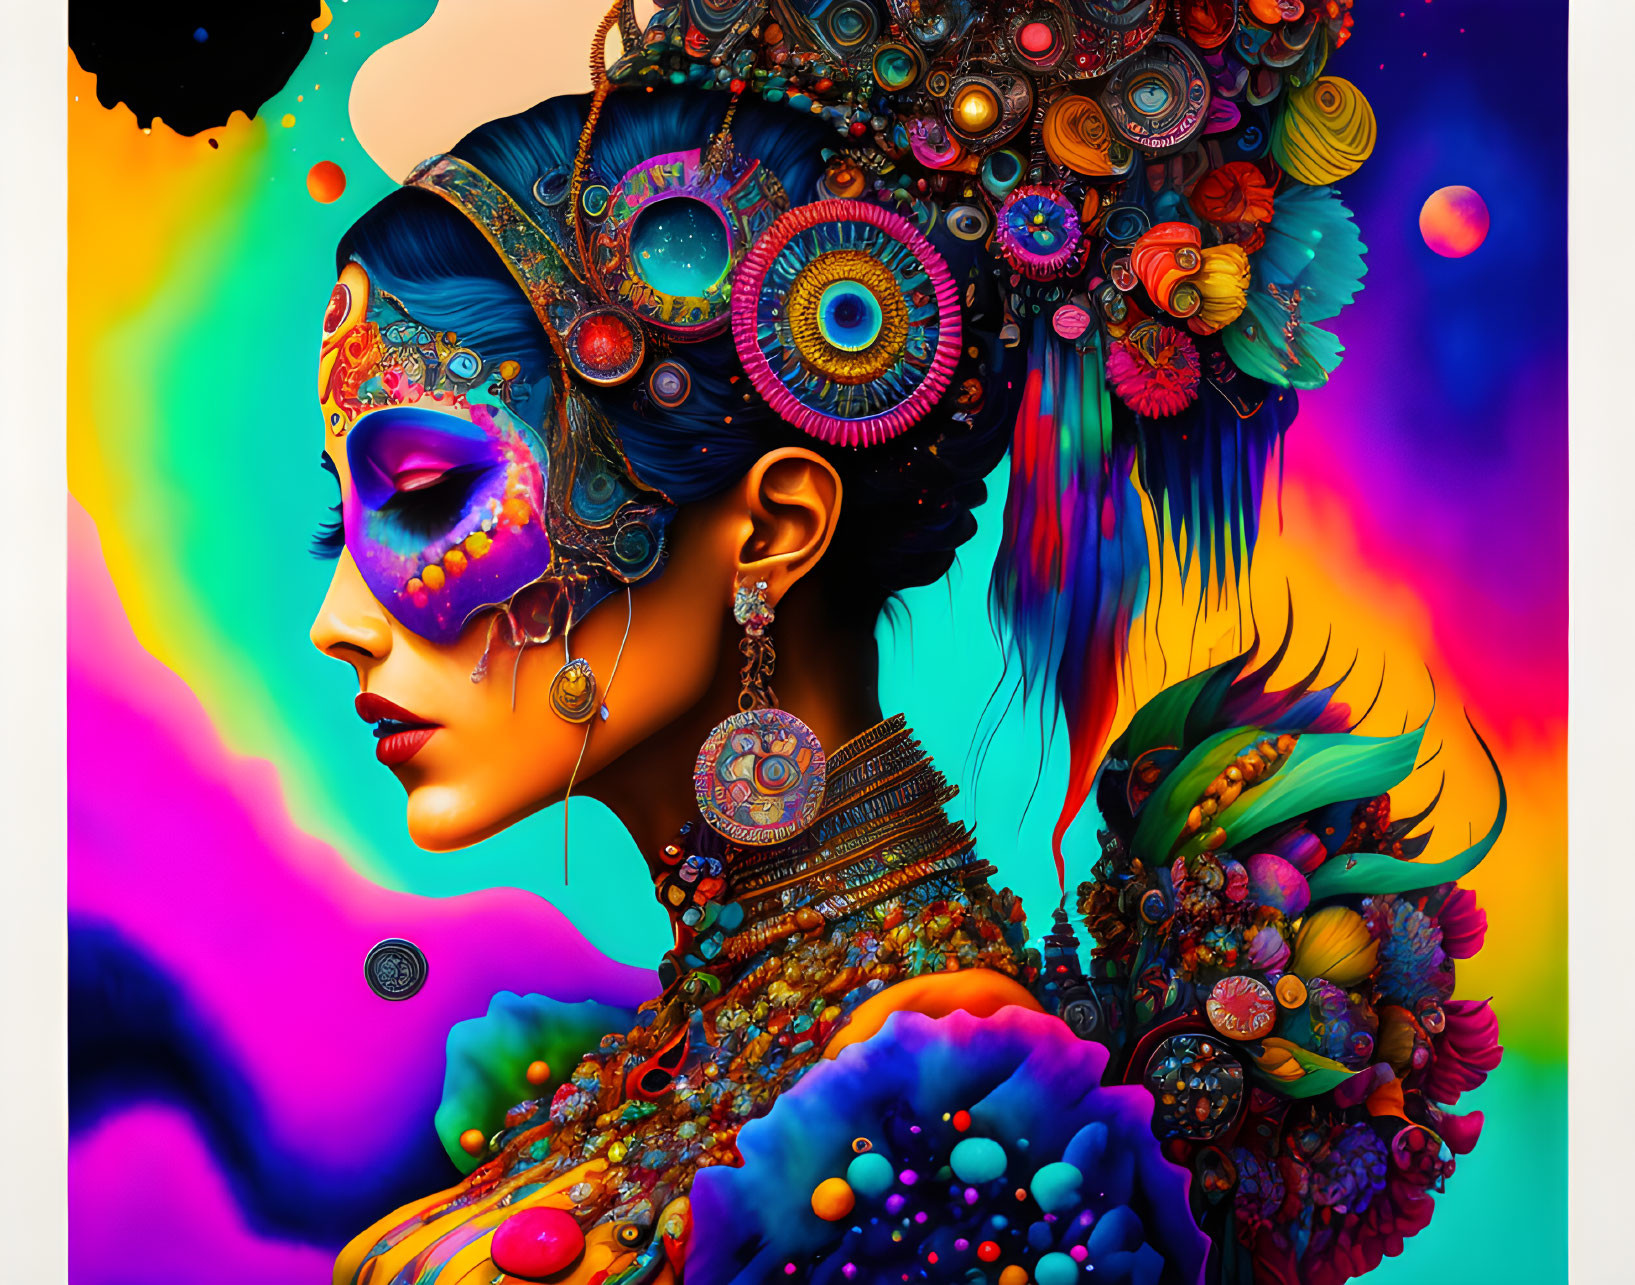 Colorful digital art: Woman with intricate headgear on vibrant backdrop